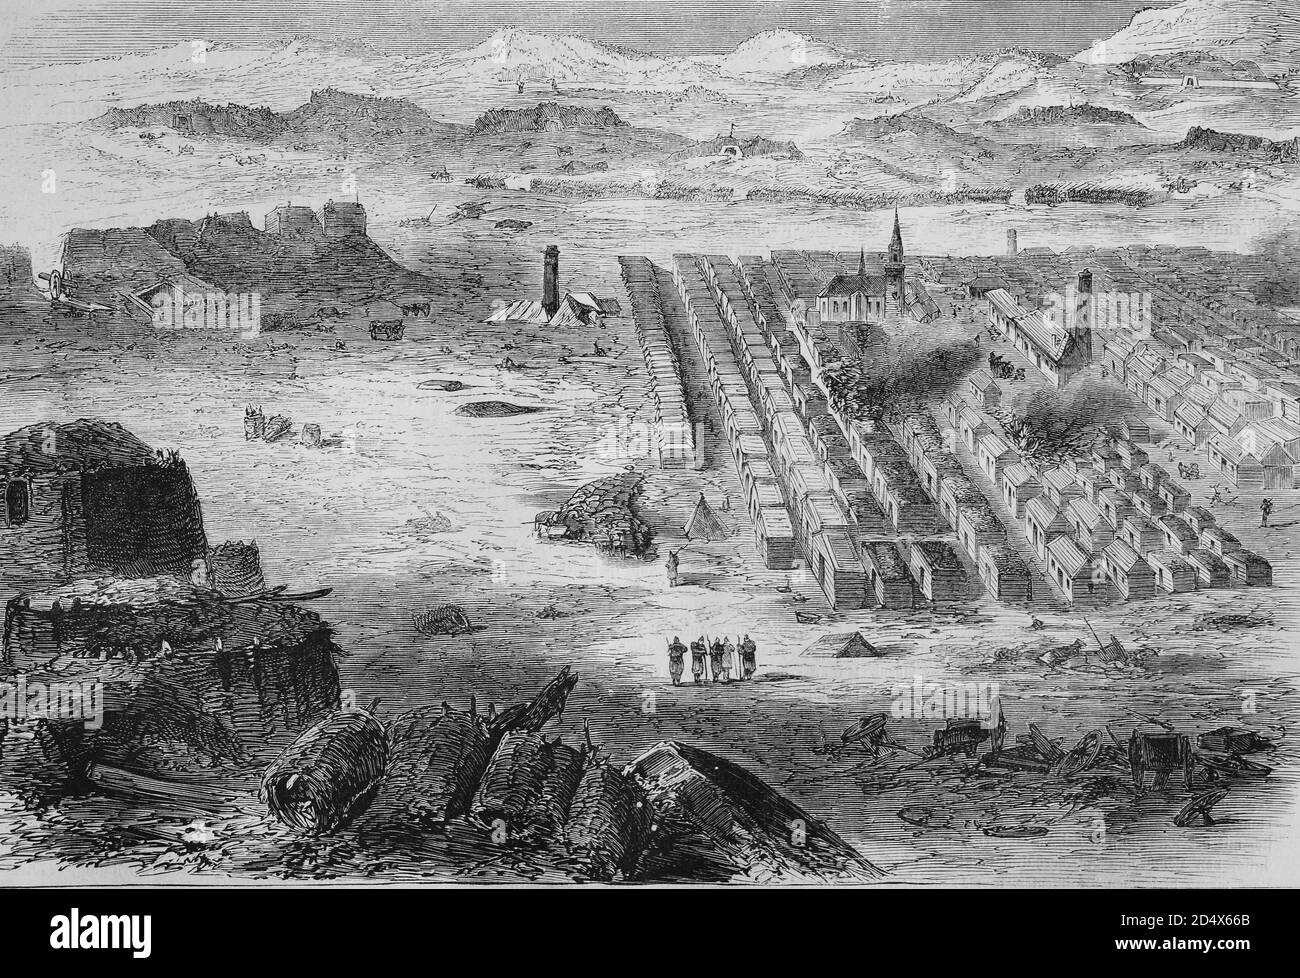 View of the camp of Conlie at Le Mans, illustrated war history, German - French war 1870-1871 Stock Photo